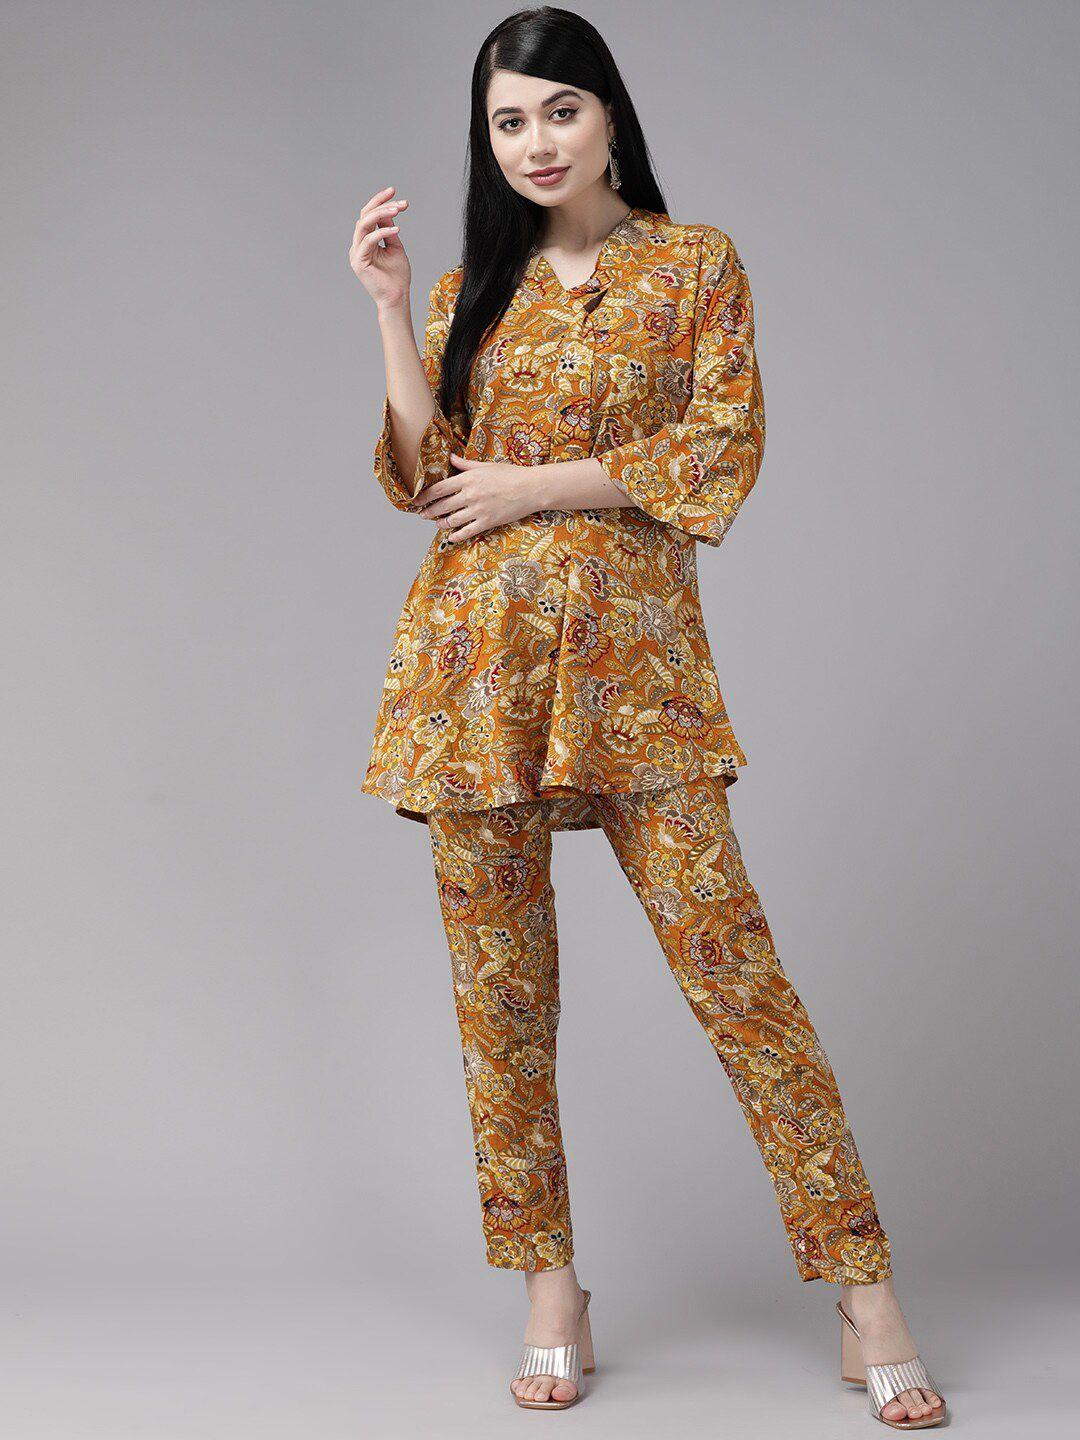 baesd floral printed pure cotton top with trouser